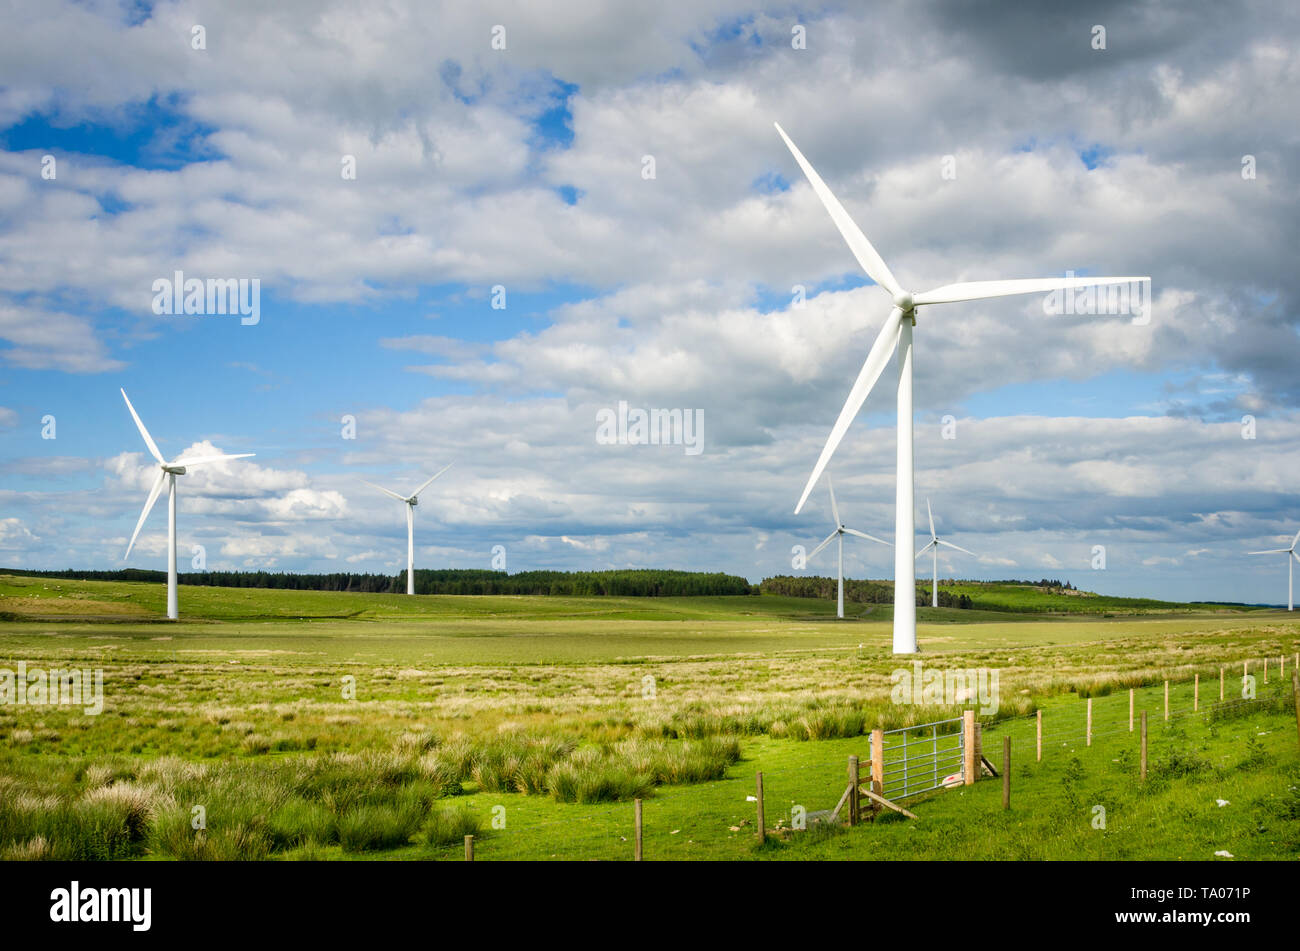 Wind Turbines in a fenced grassy field with woods in background on a sunny spring day. England, UK. Stock Photo